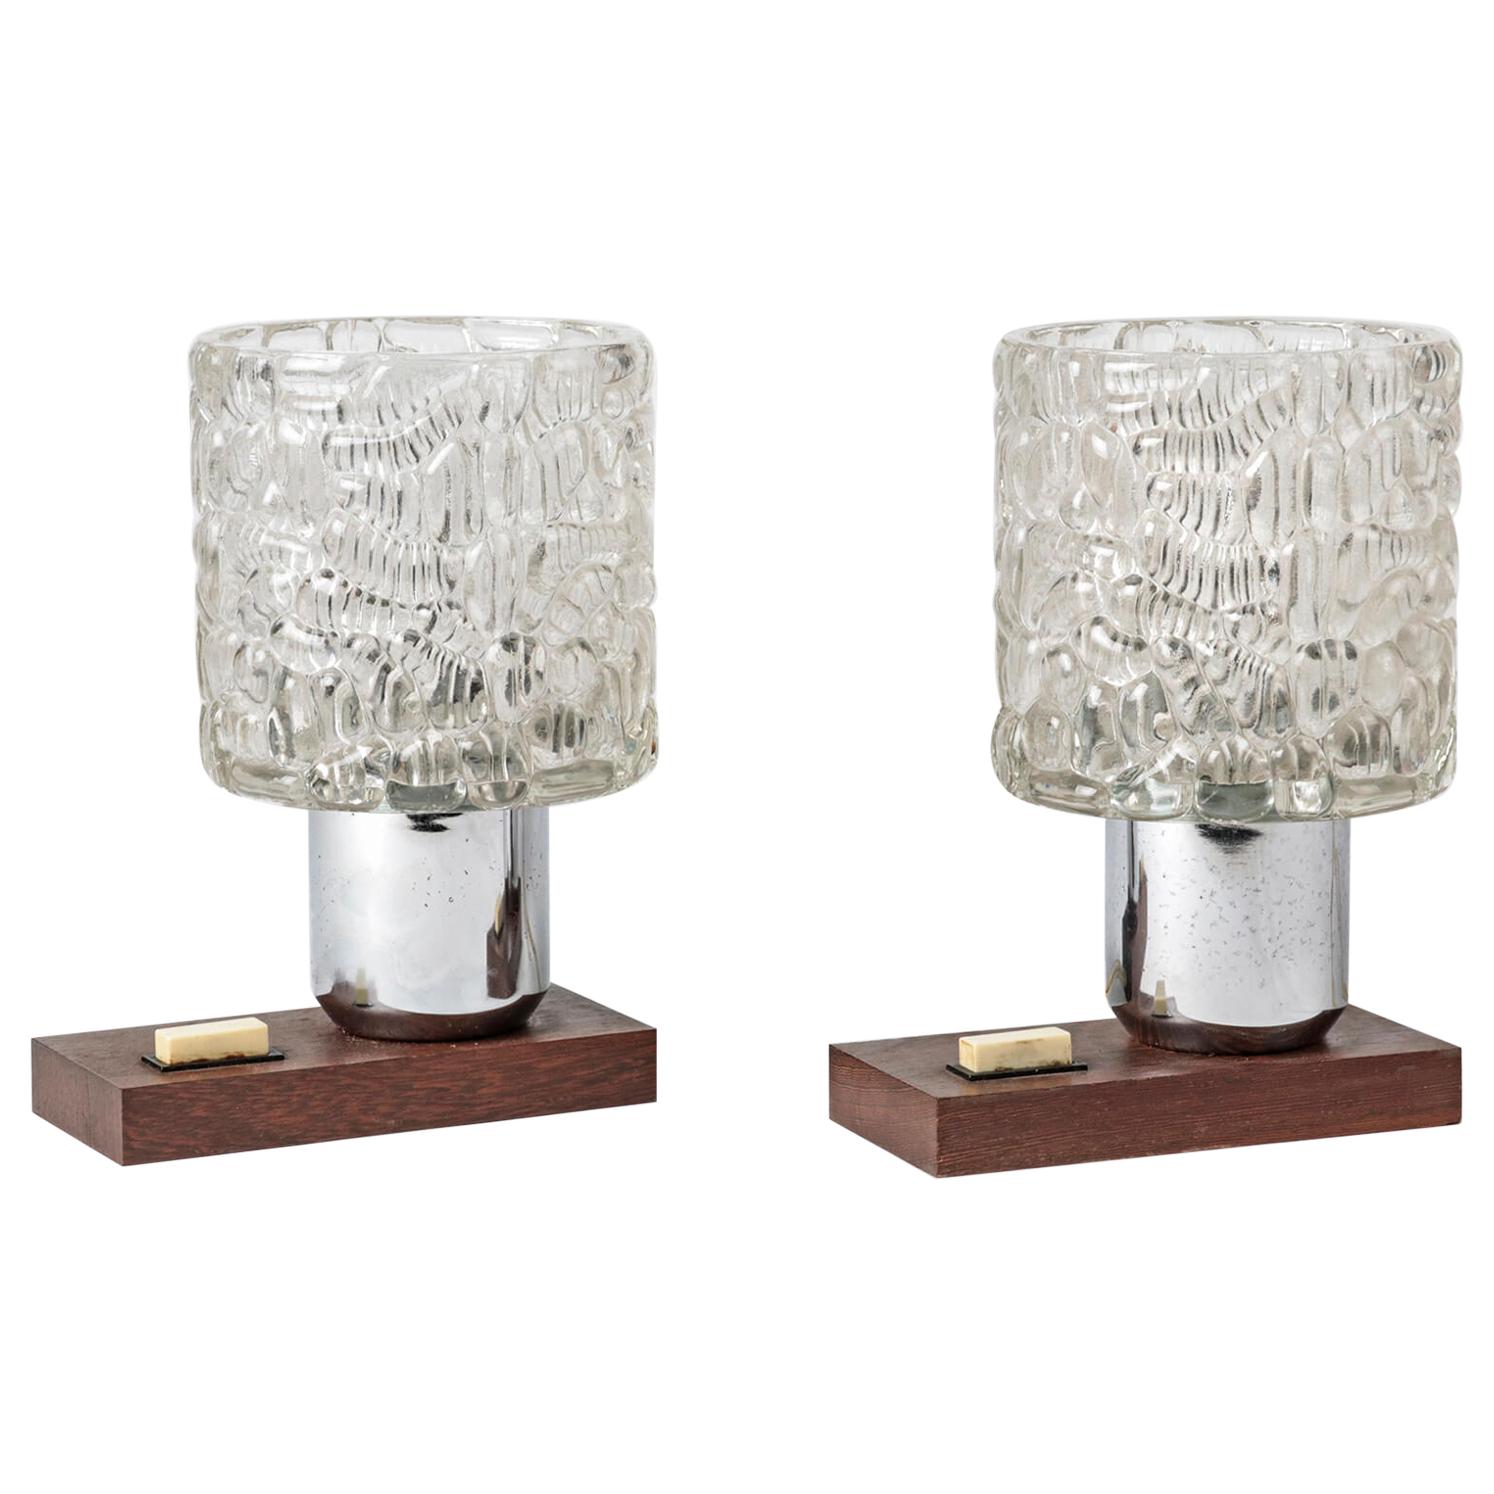 Pair of Mid-20th Century Modern Design Table Lamps